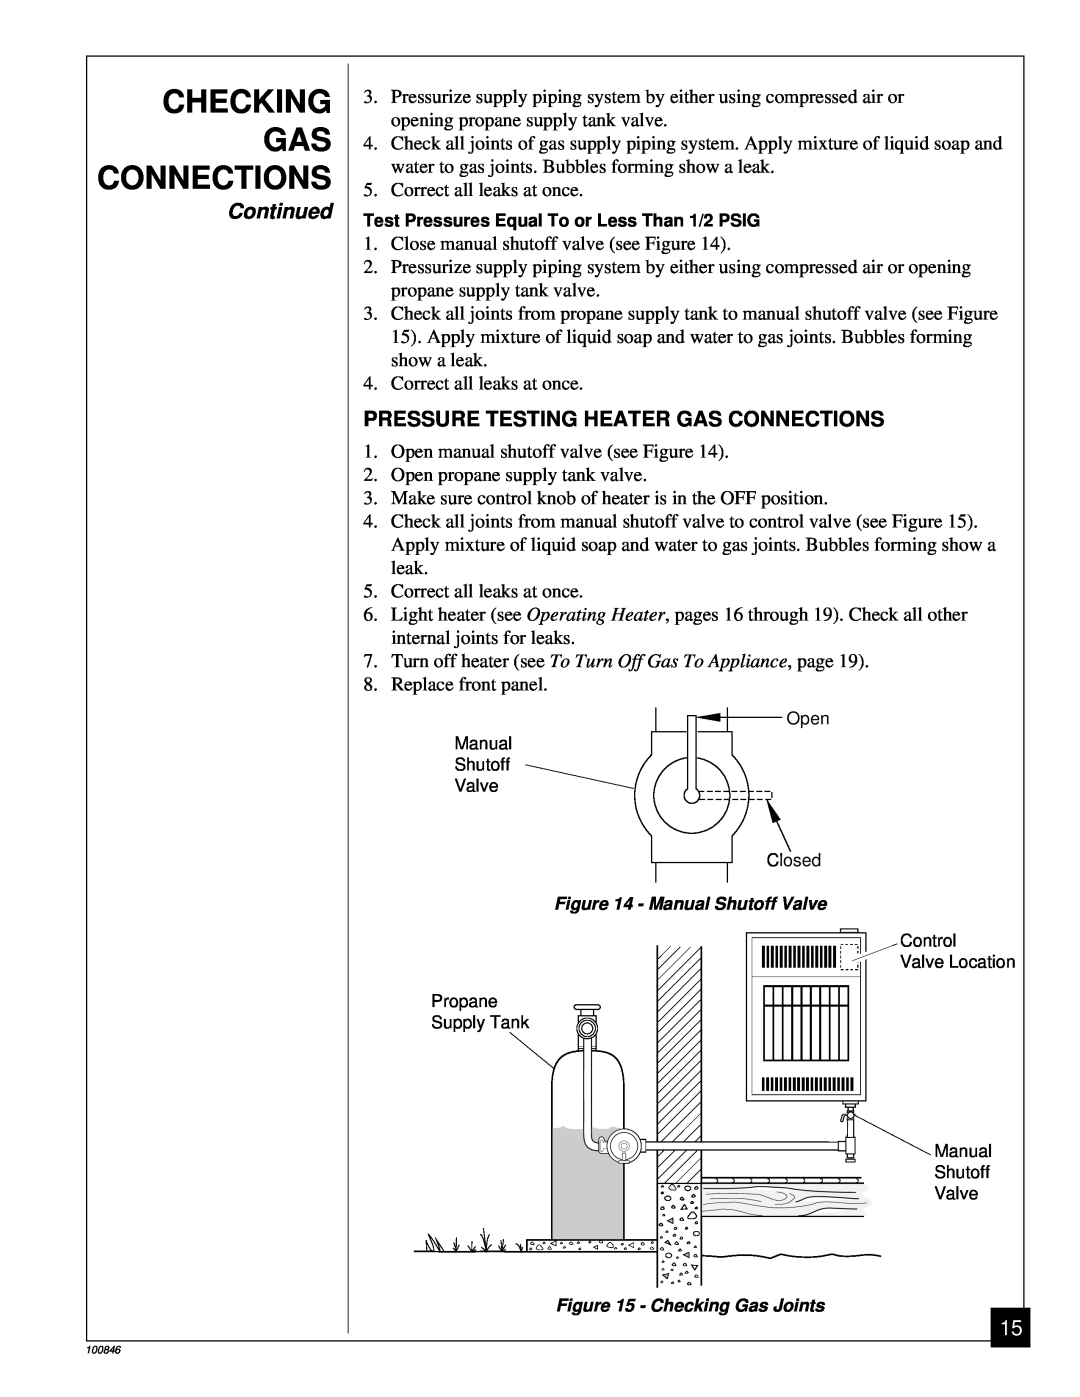 Desa CGP11A installation manual Checking, Continued, Pressure Testing Heater Gas Connections 